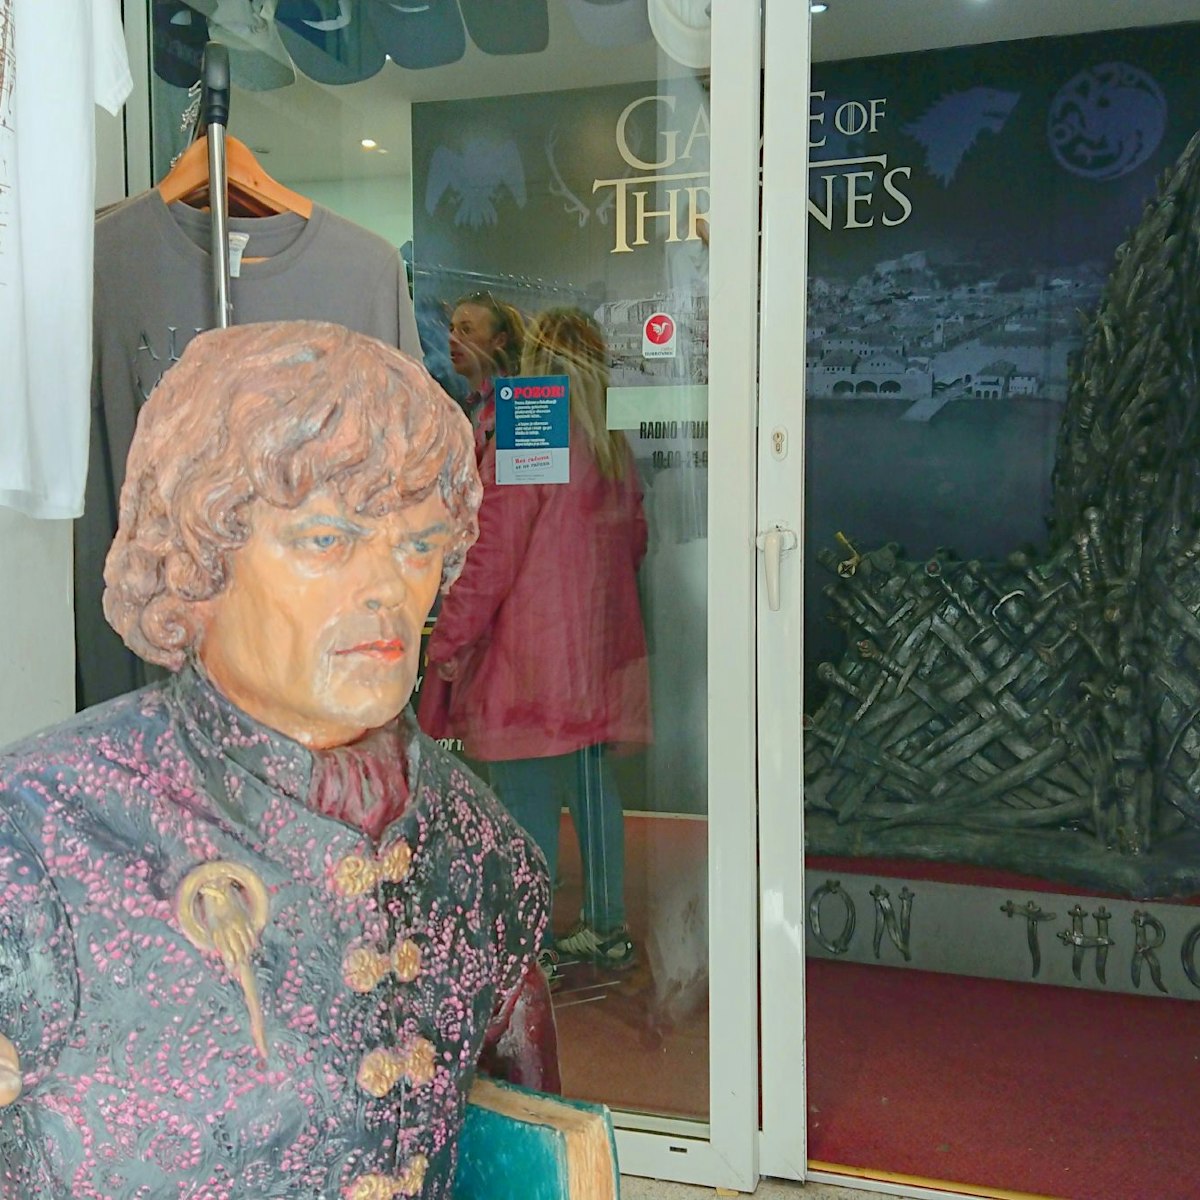 Peter Dinklage Statue and the Throne at Dubrovnik City Shop